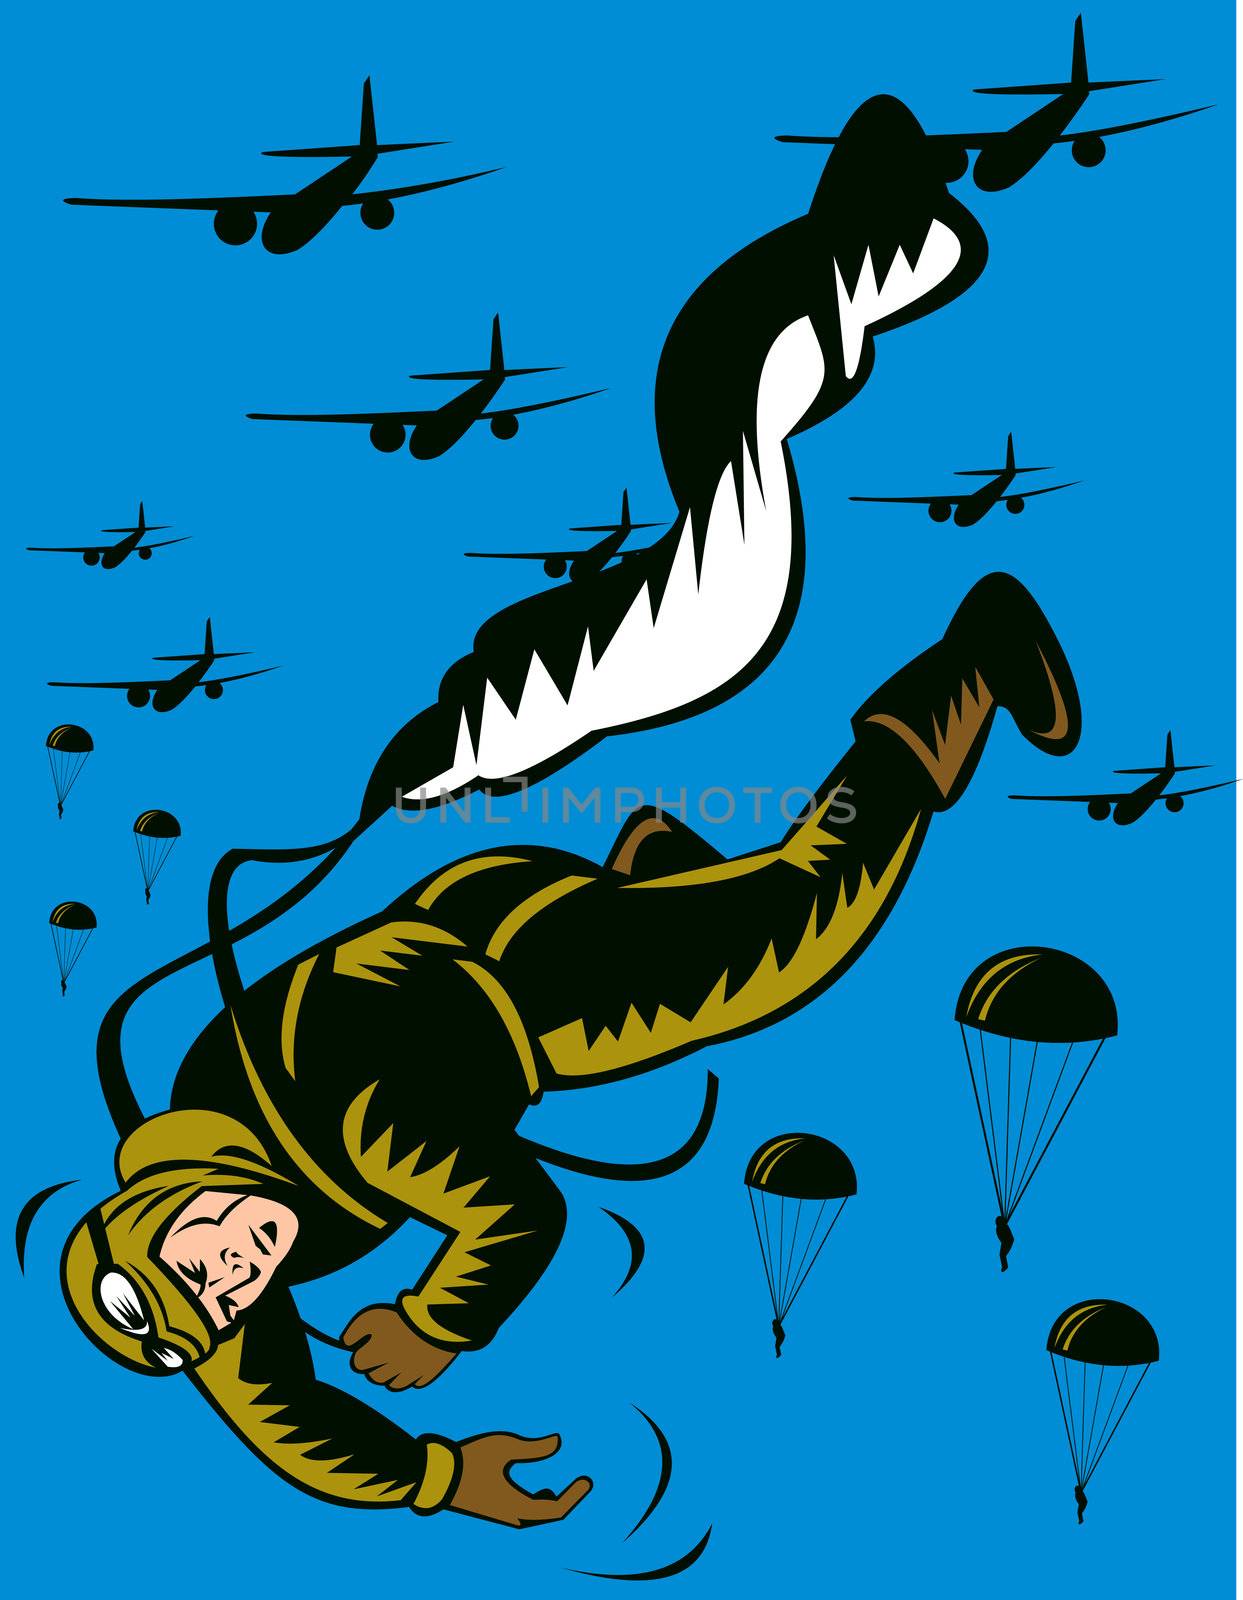 illustration of a World war two soldier parachuting pulling cord